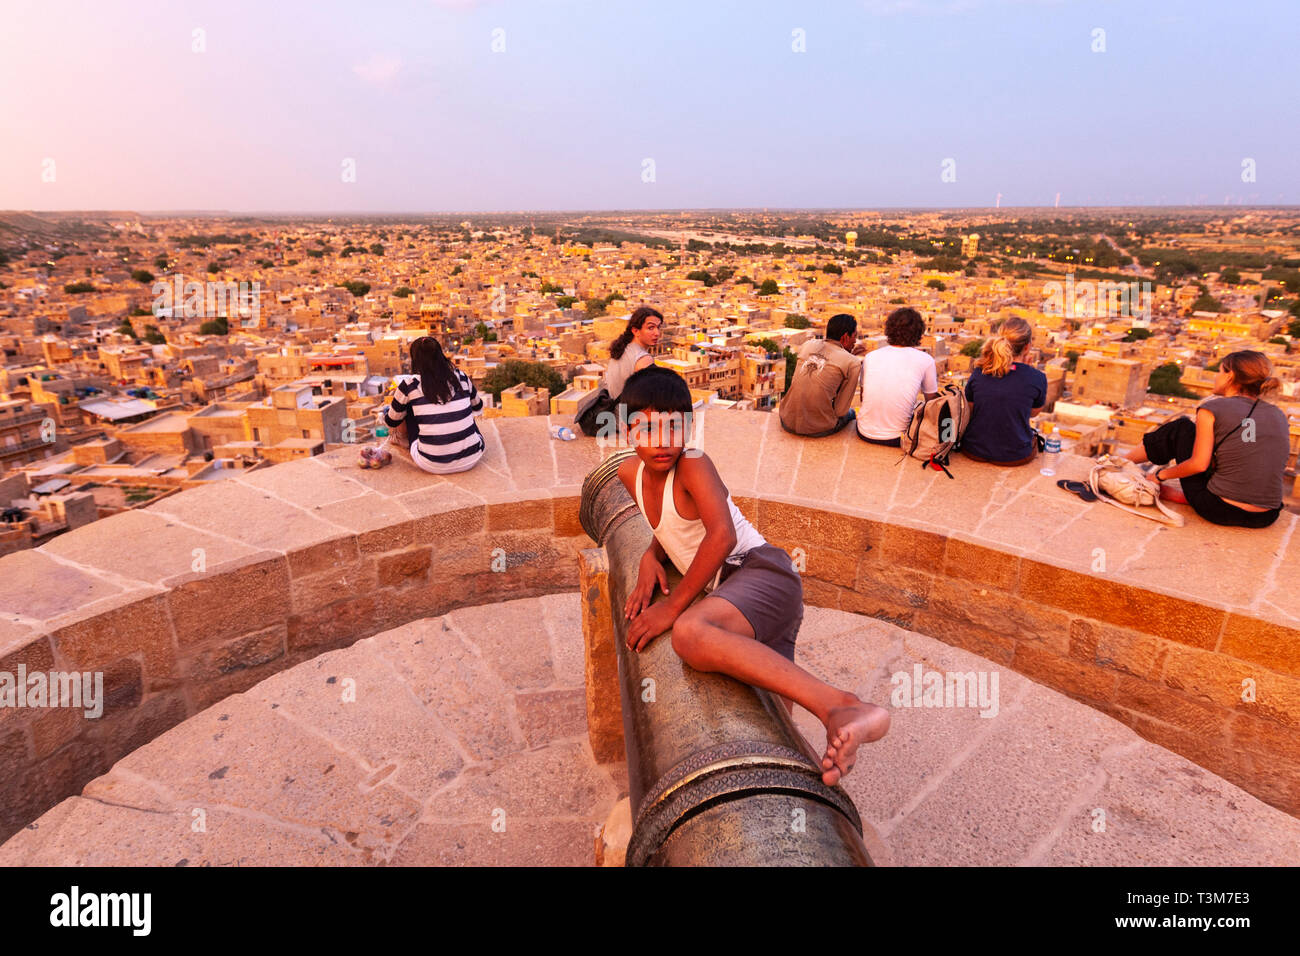 Local boy in Cannon at Jaisalmer Fort with tourists looking Jaisalmer city at sunset, Rajasthan, India Stock Photo